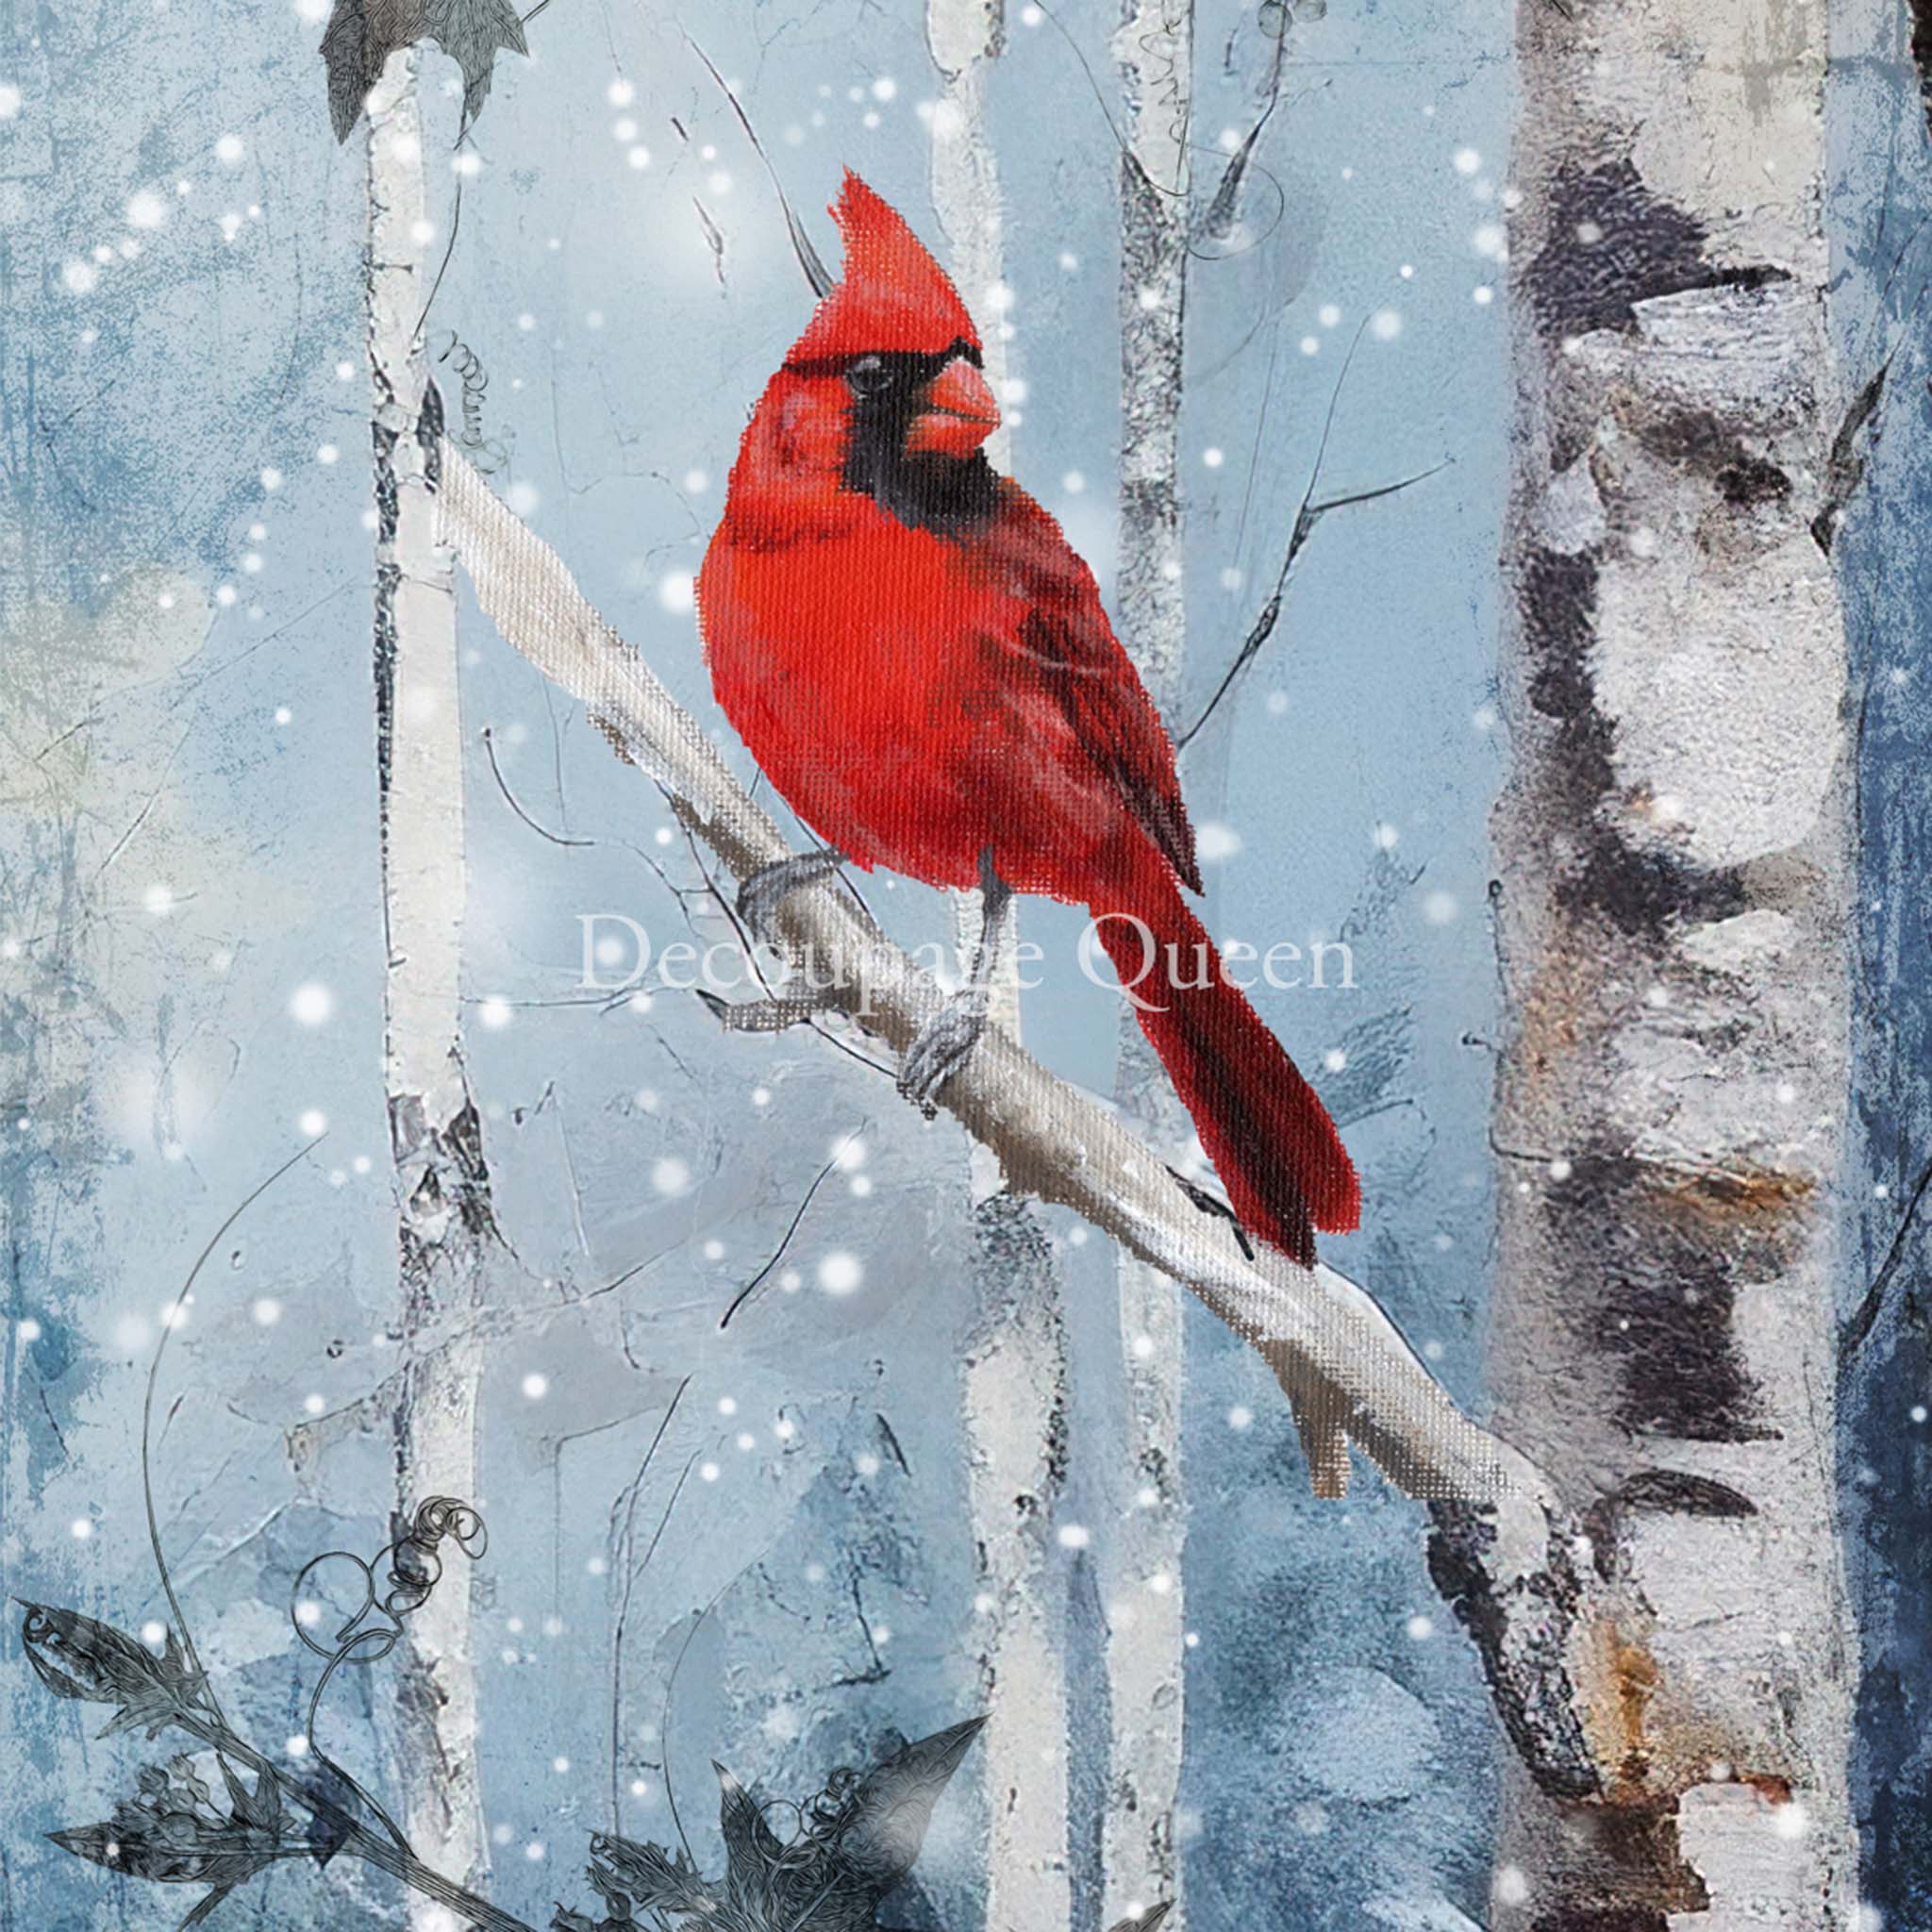 A3 rice paper design featuring a cardinal perched on a snow-covered birch limb.